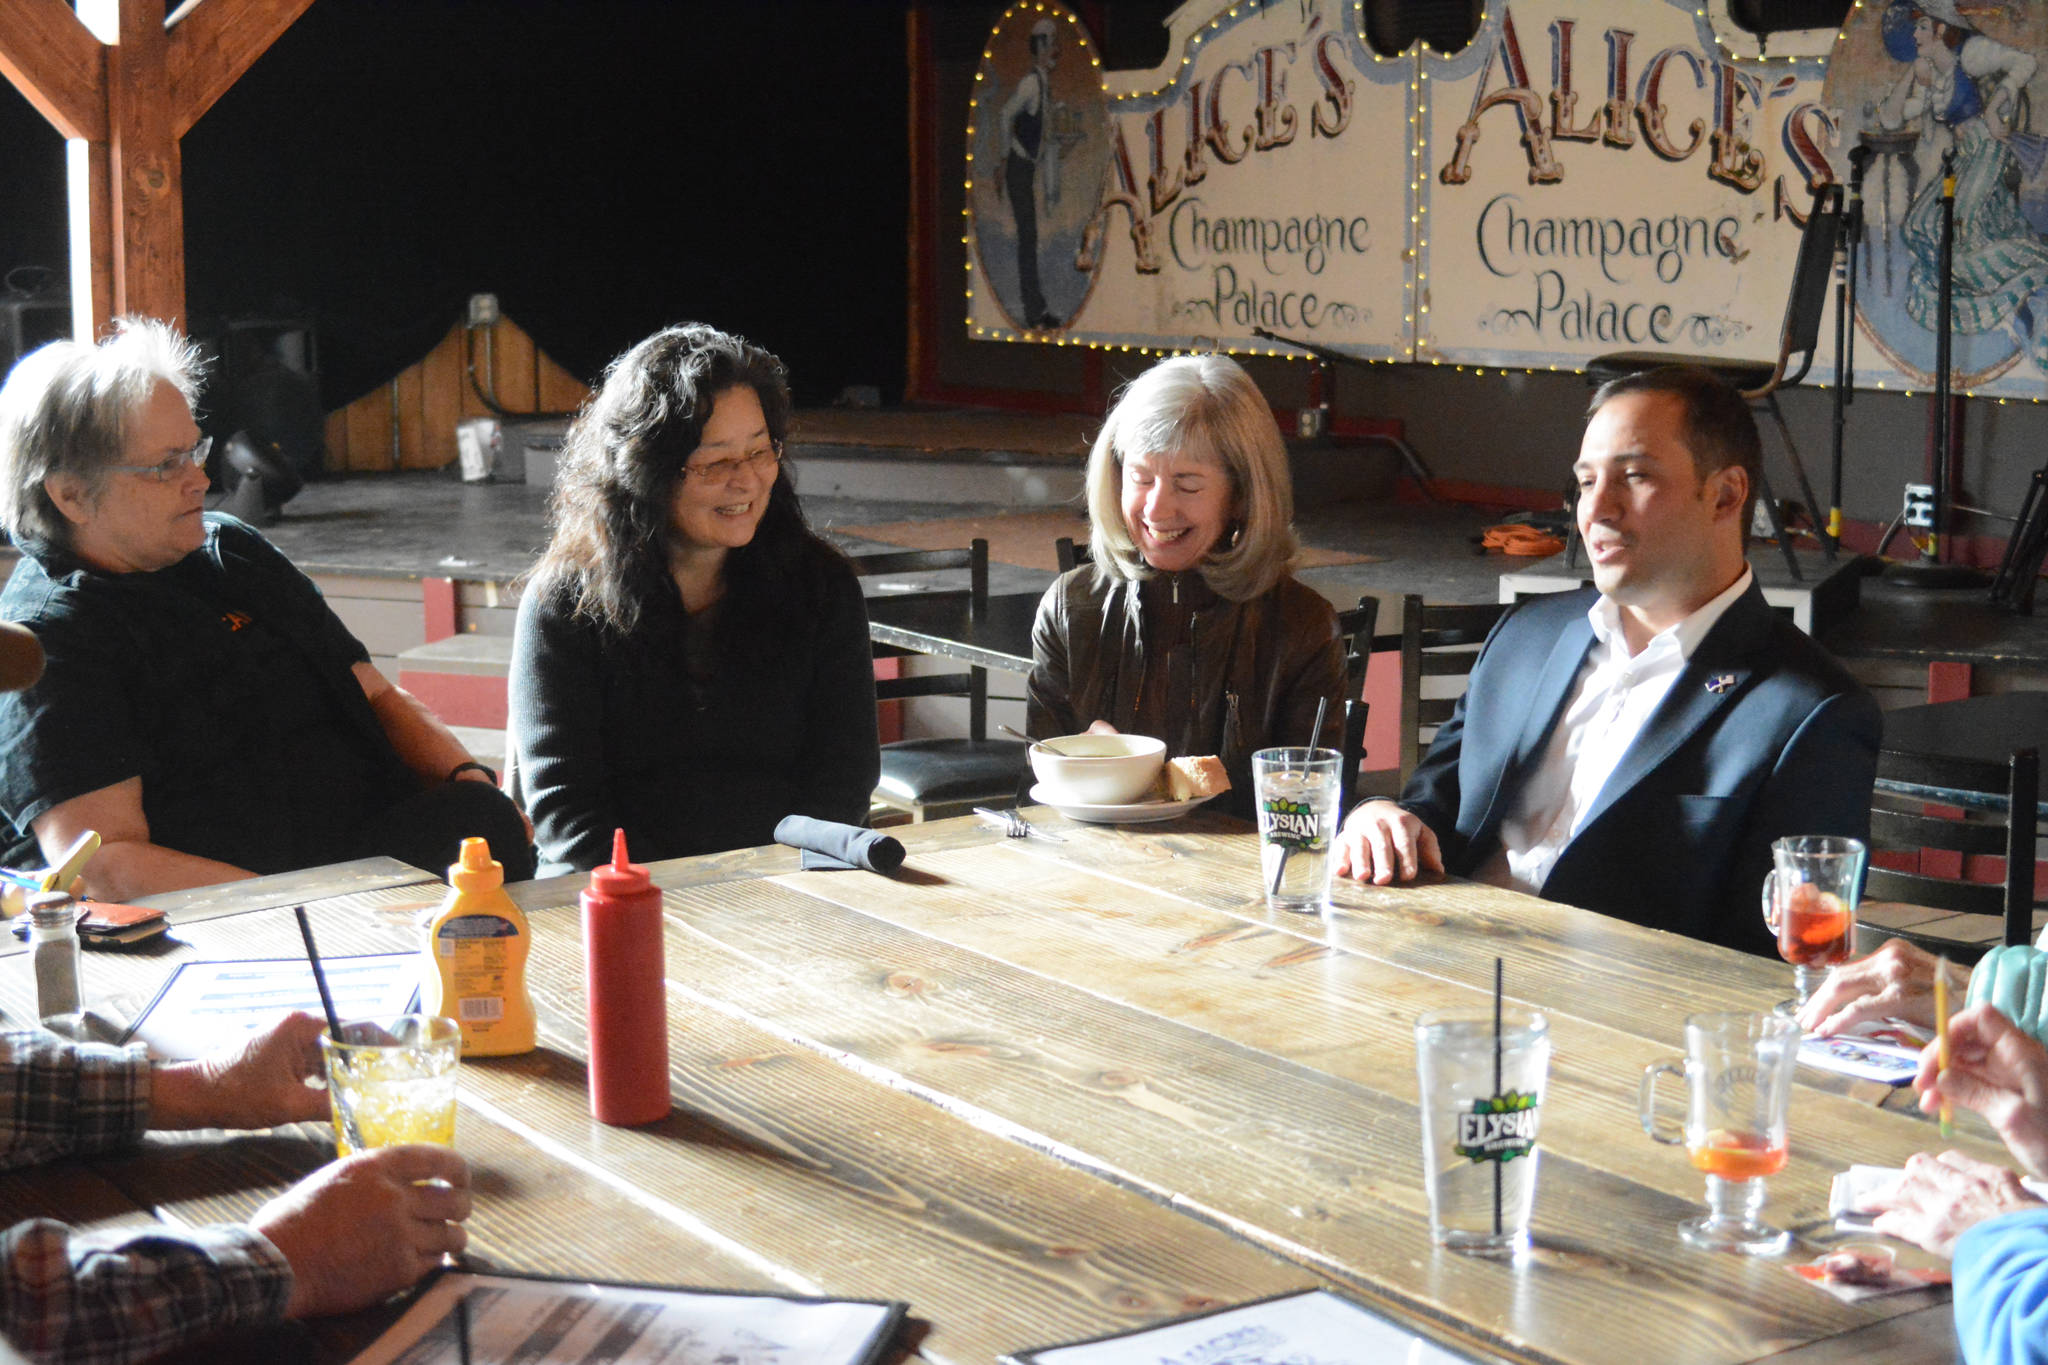 Dimitri Shein, far right, speaks to about 15 people at Alice’s Champagne Palace on Monday, March 26, in Homer, Alaska. (Photo by Michael Armstrong, Homer News)